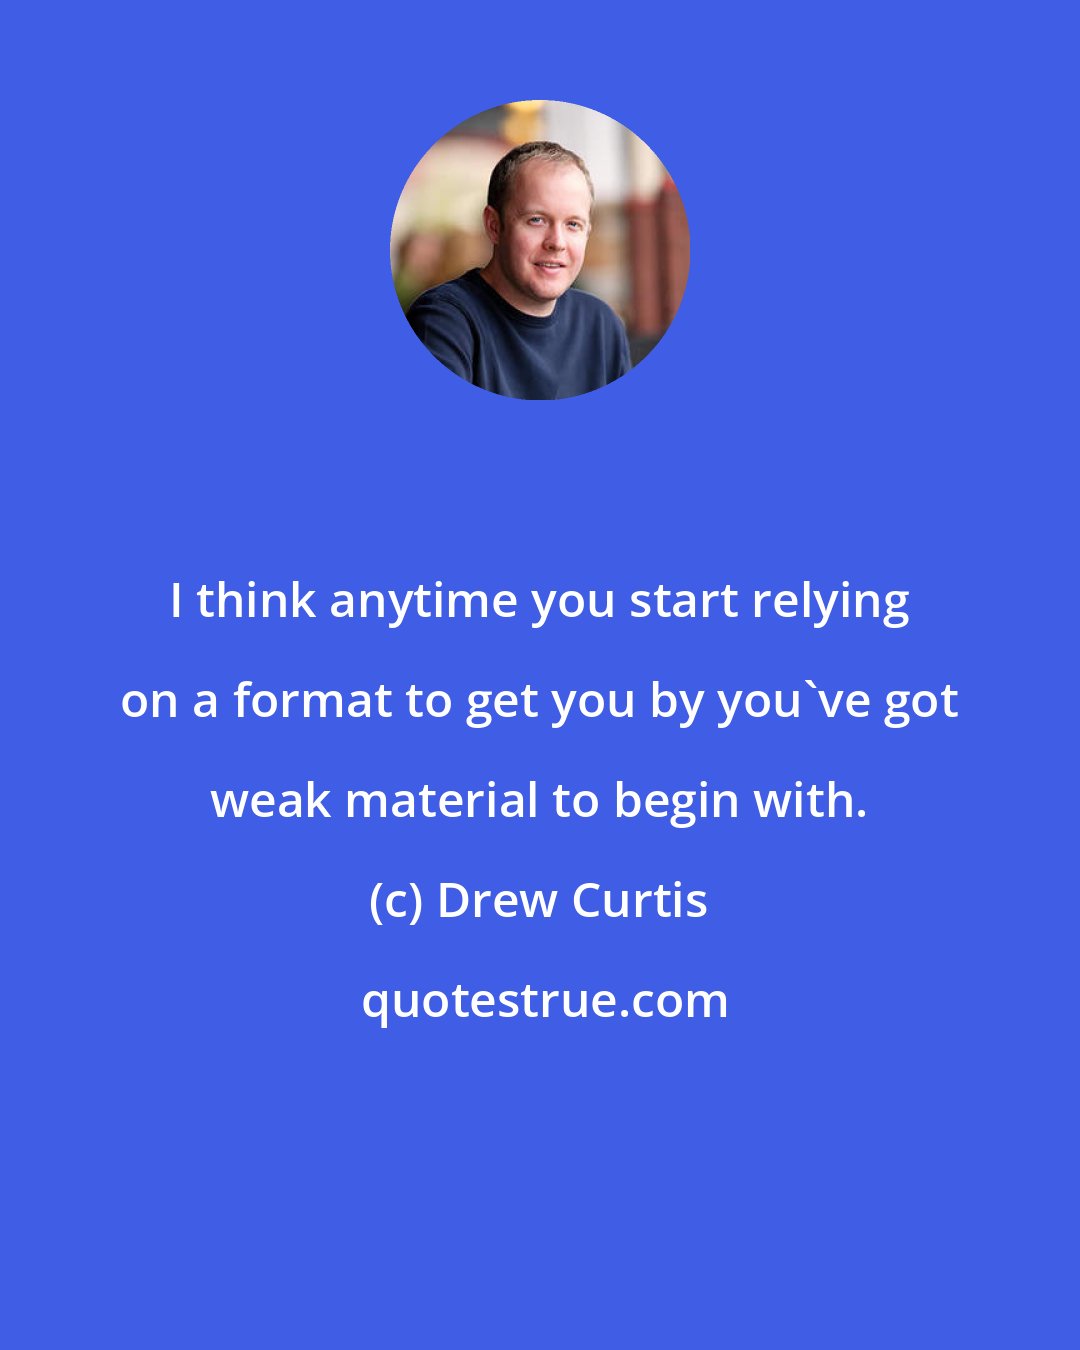 Drew Curtis: I think anytime you start relying on a format to get you by you've got weak material to begin with.